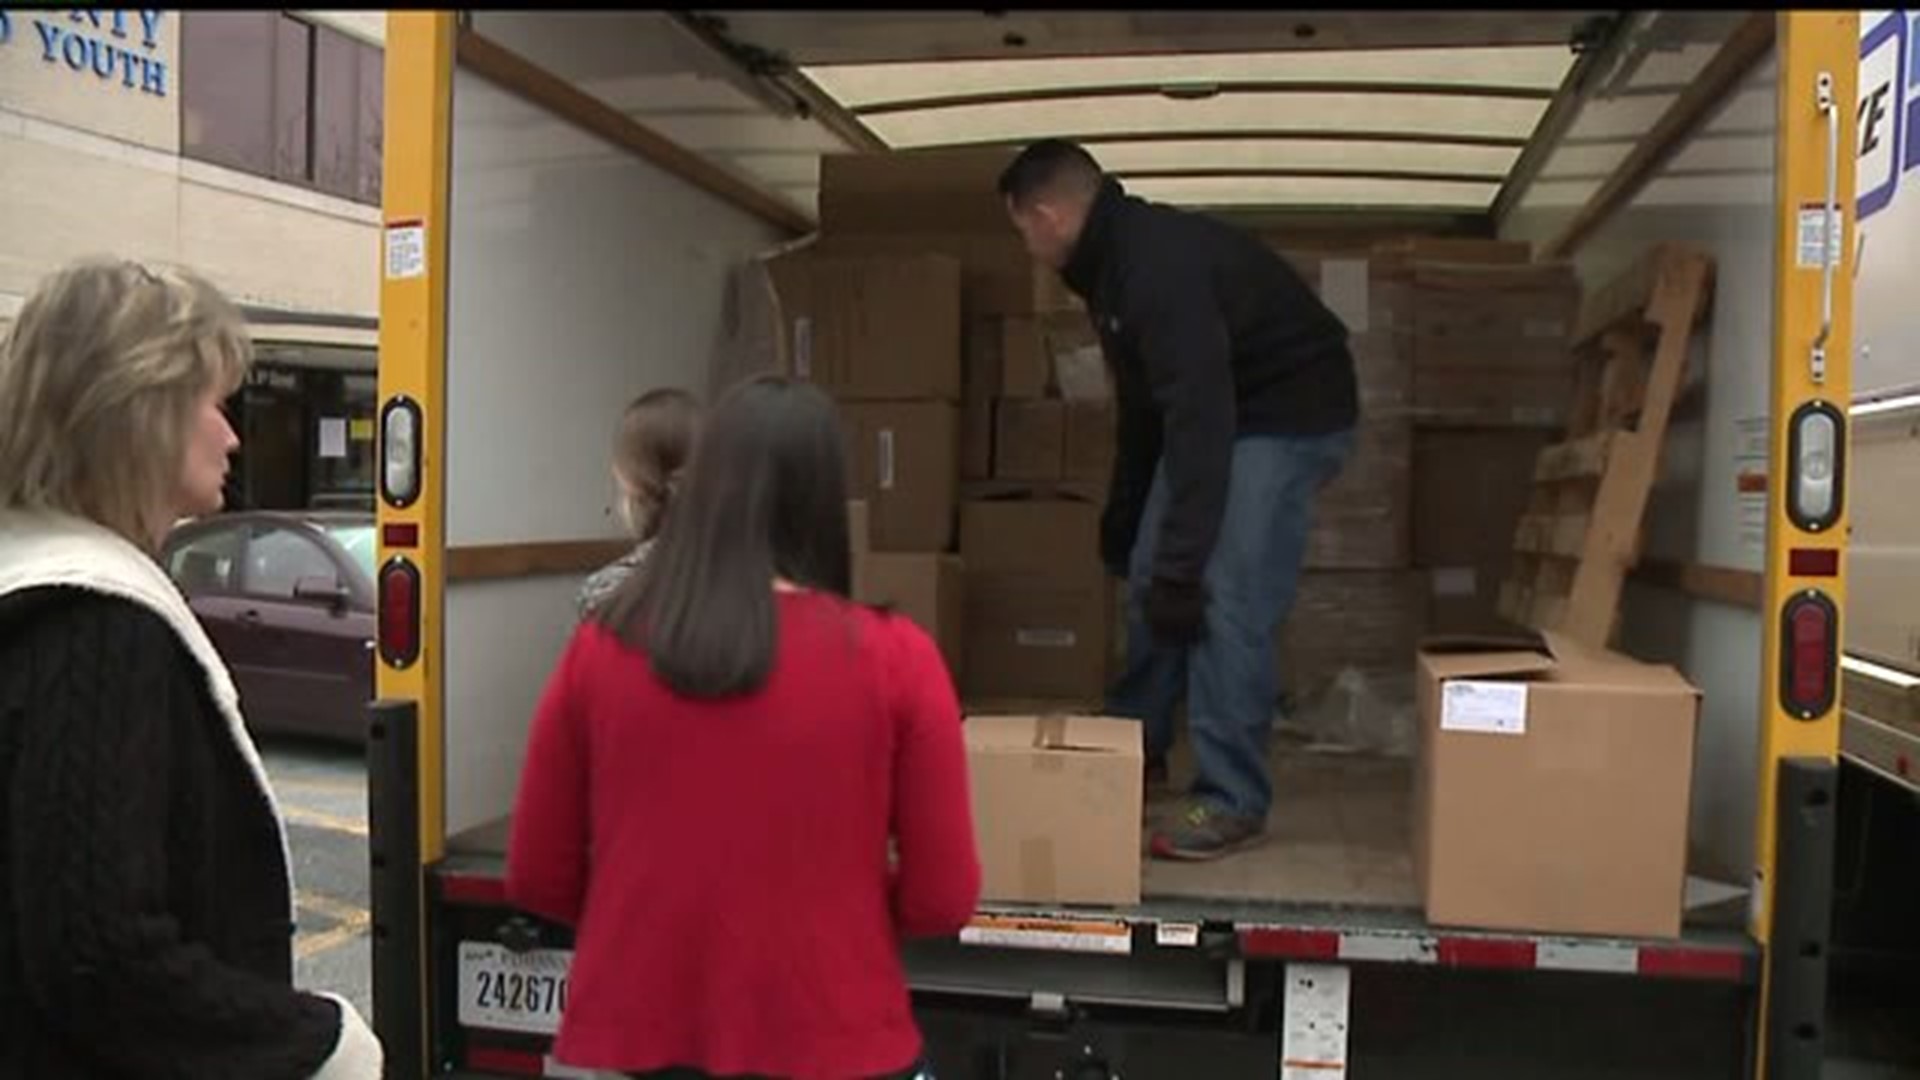 U.S. Marines make donation to local Toys for Tots